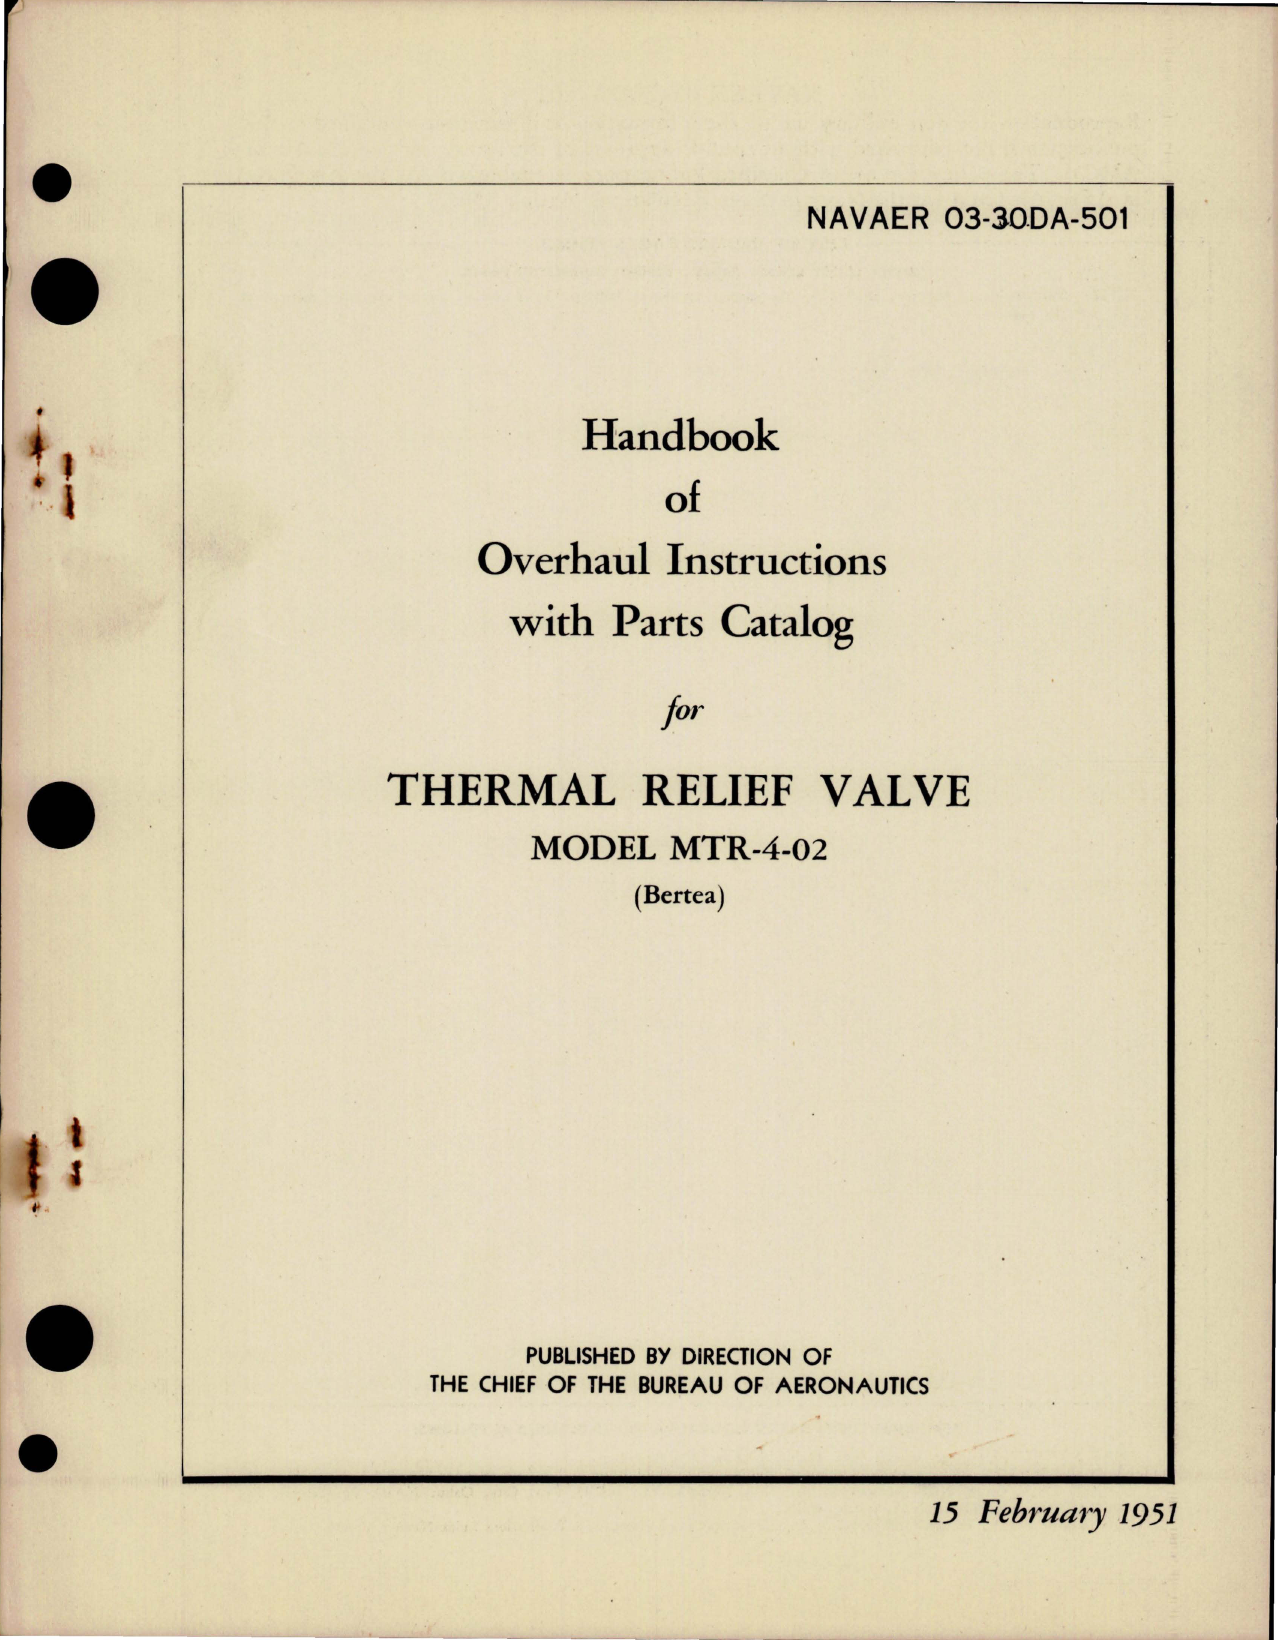 Sample page 1 from AirCorps Library document: Overhaul Instructions with Parts Catalog for Thermal Relief Valve - Model MTR-4-02 